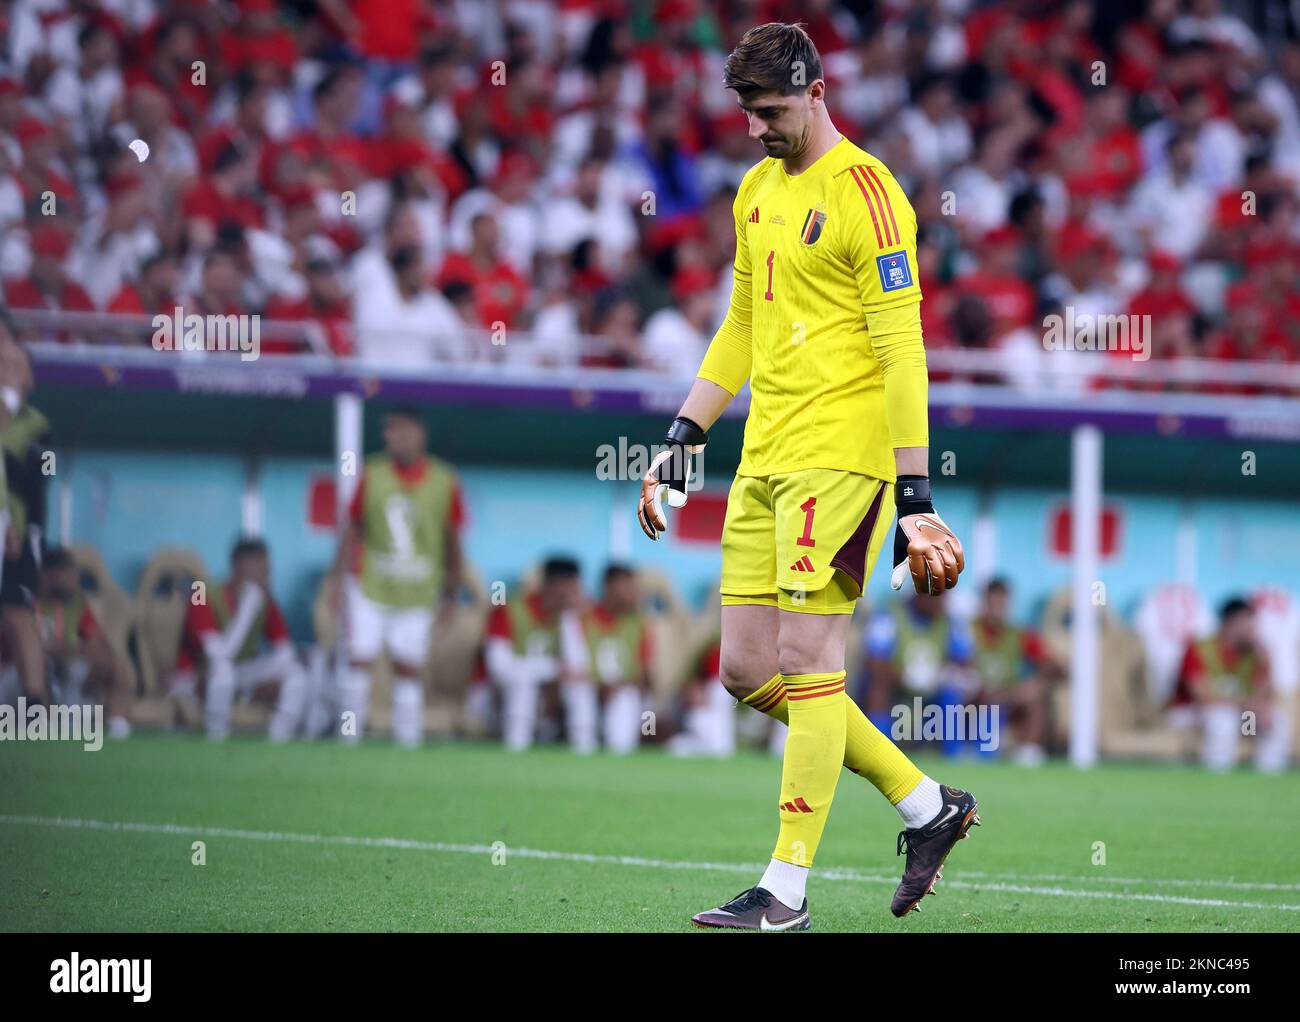 Belgium's goalkeeper Thibaut Courtois reacts during a soccer game between Belgium's national team the Red Devils and Morocco, in Group F of the FIFA 2022 World Cup in Al Thumama Stadium, Doha, State of Qatar on Sunday 27 November 2022. BELGA PHOTO BRUNO FAHY Stock Photo